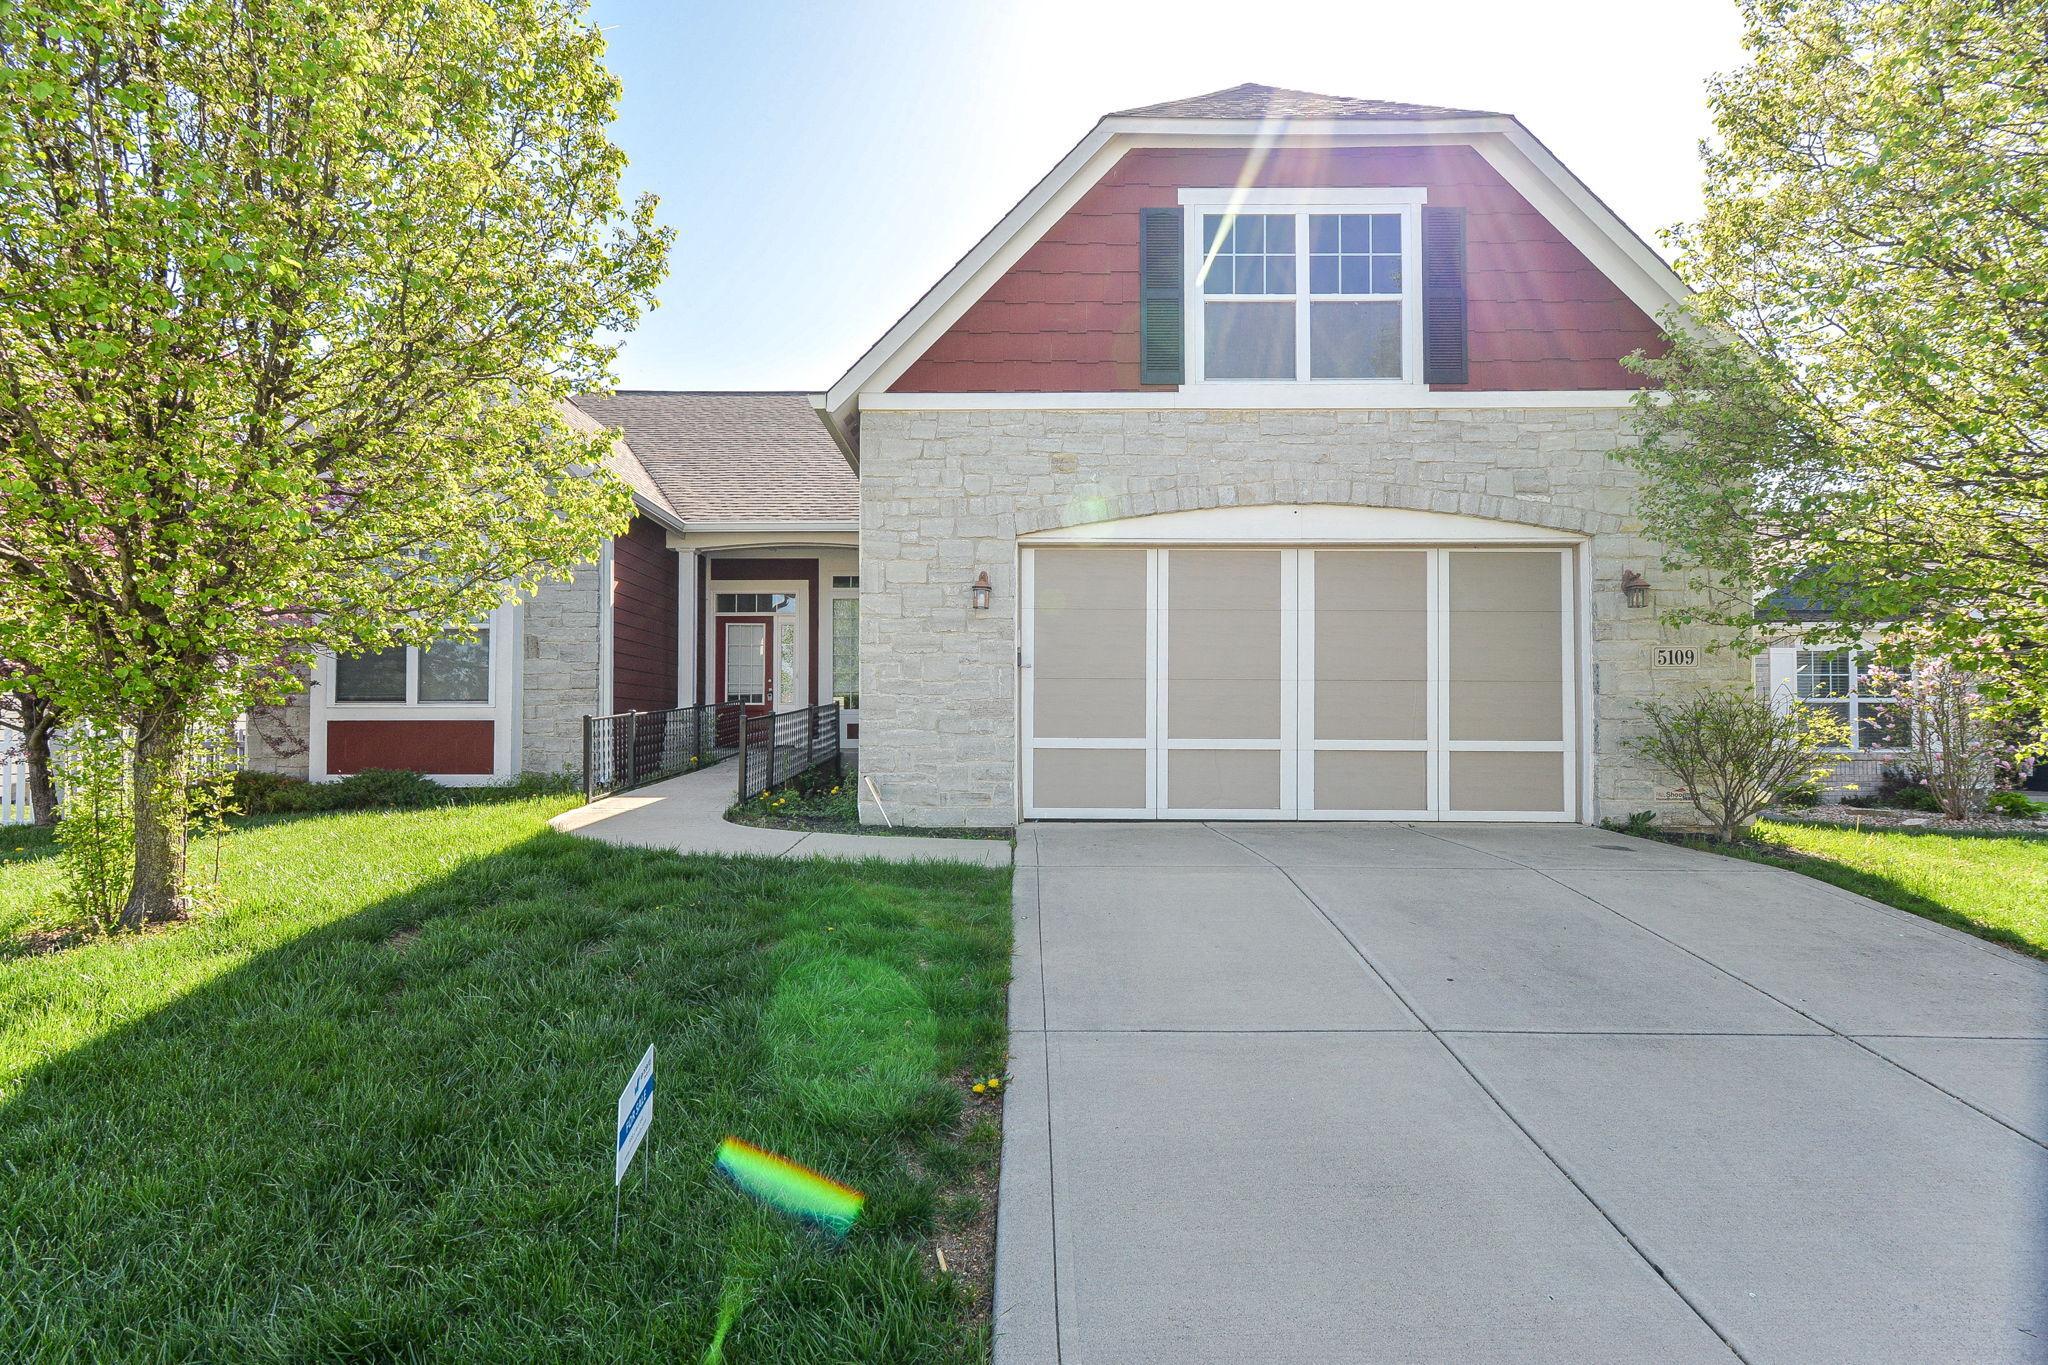 Photo one of 5109 Melville Way Indianapolis IN 46239 | MLS 21971627